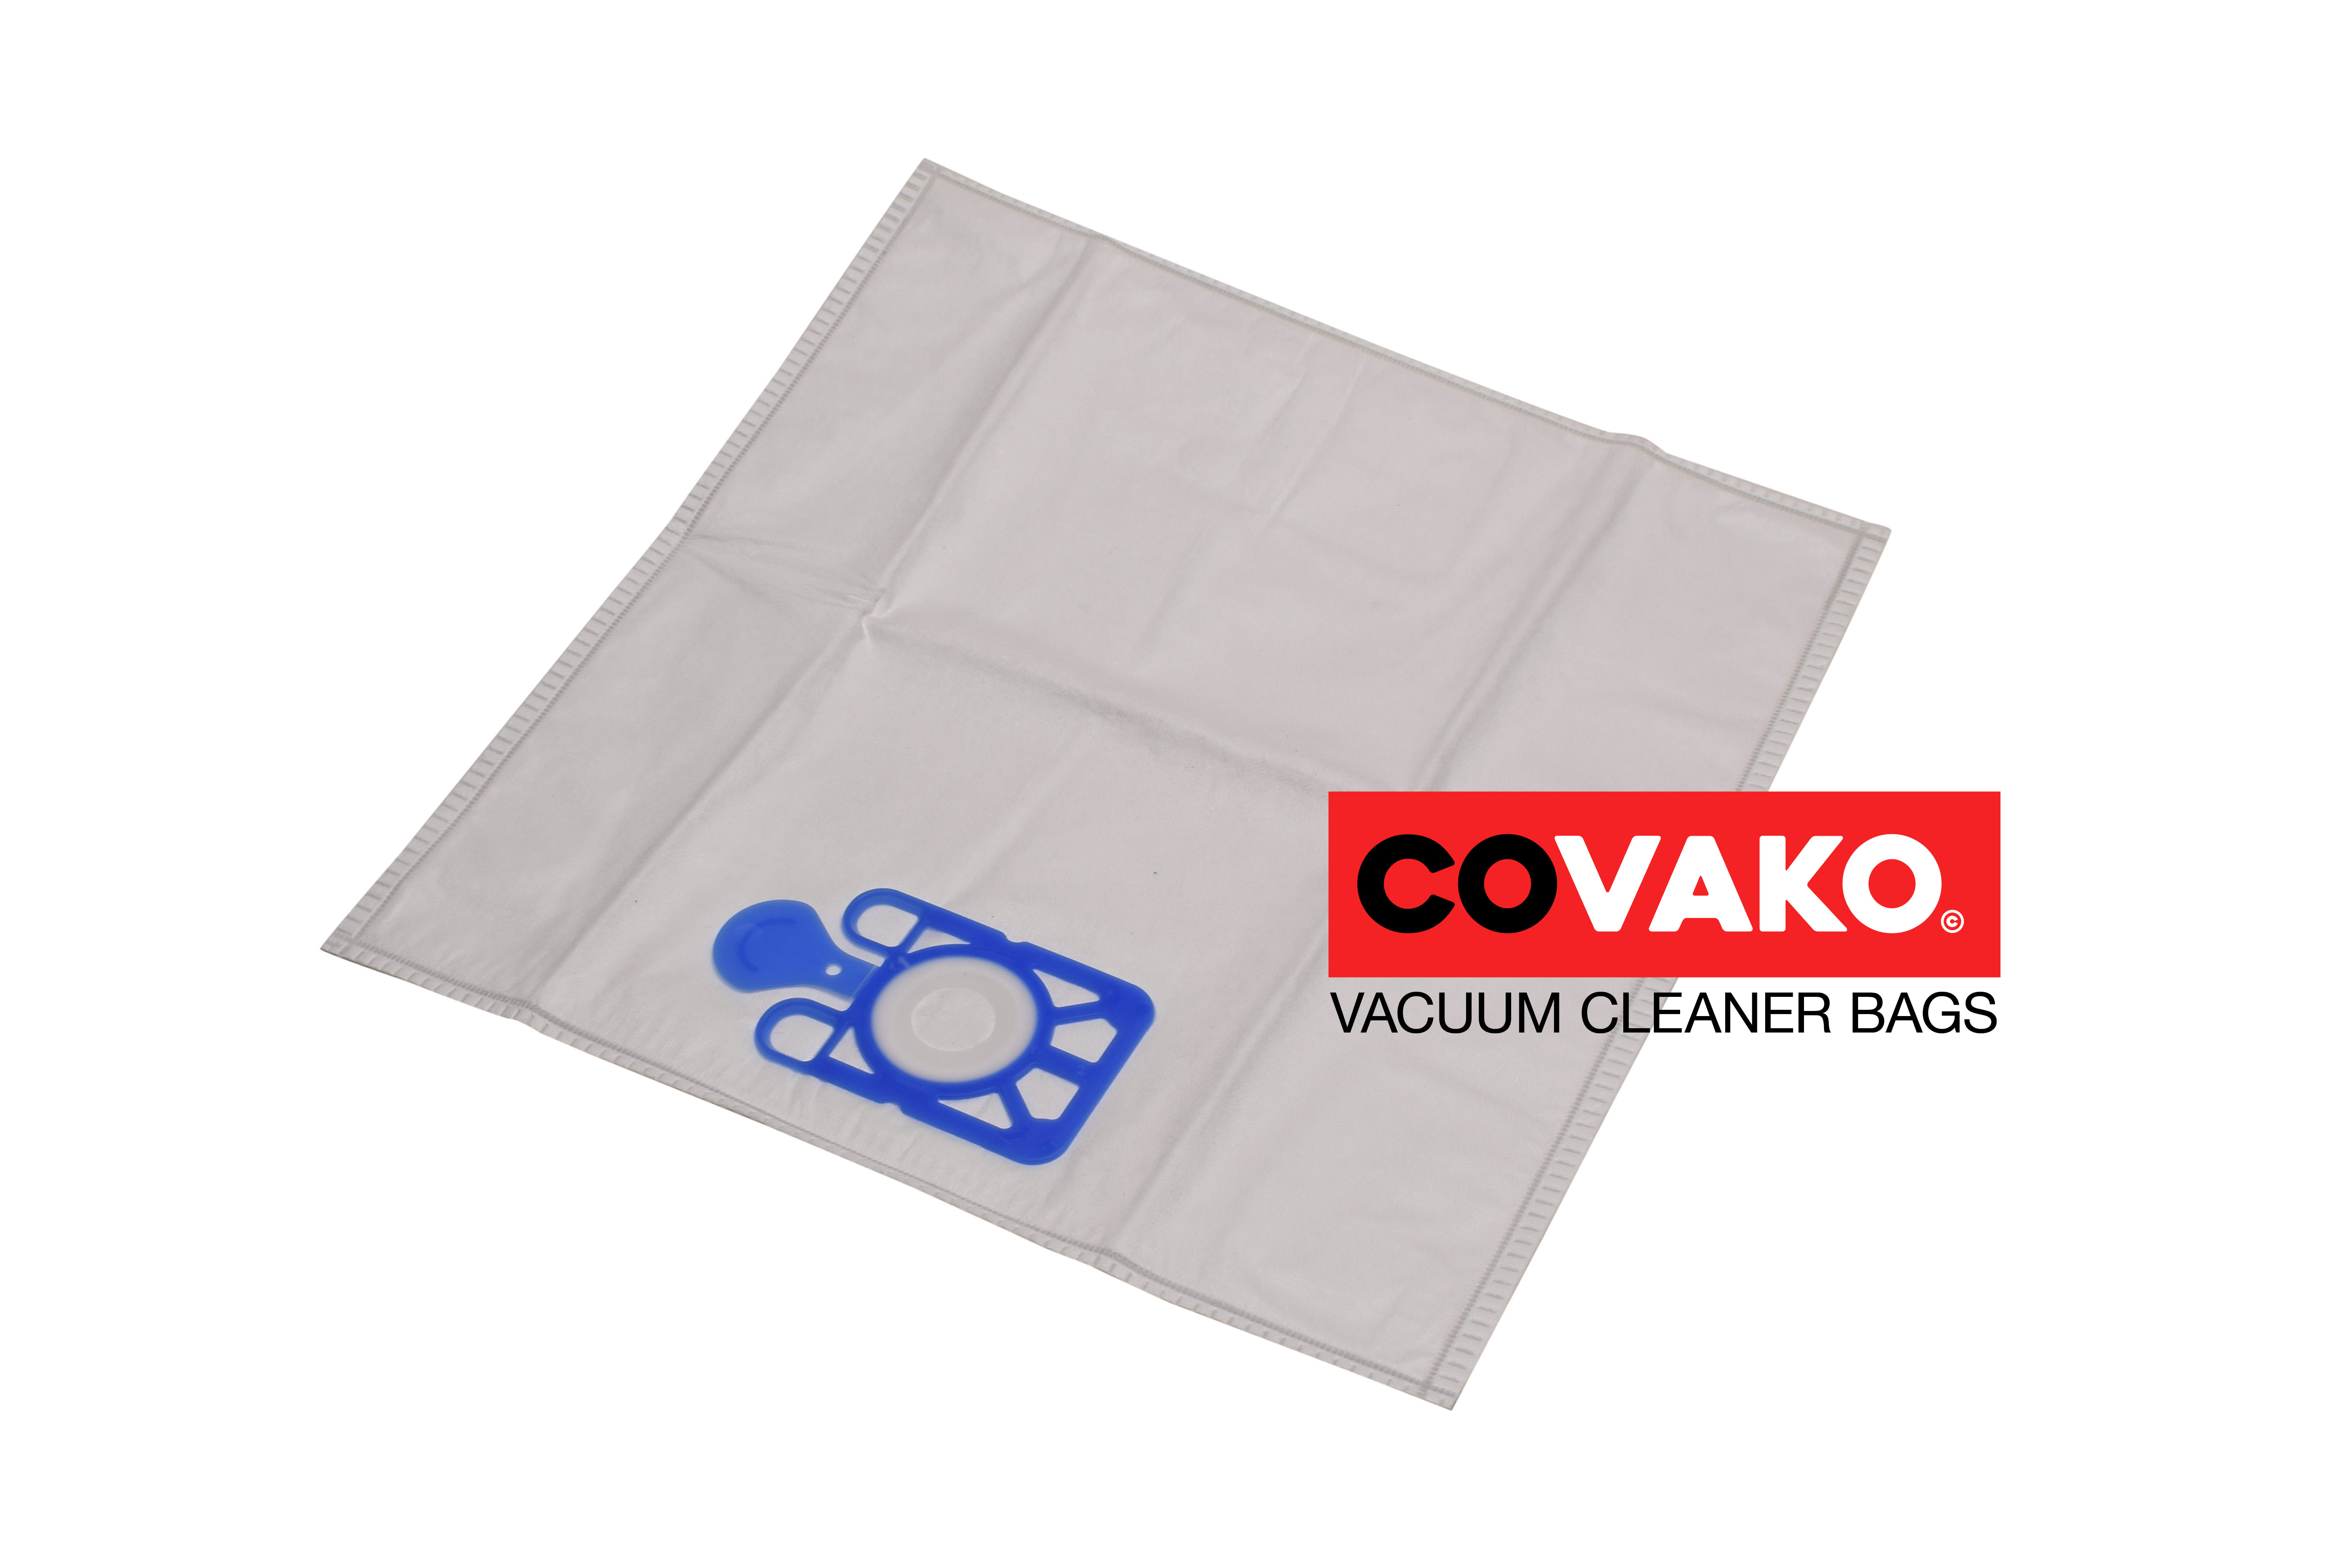 Viper GV0007 / Synthesis - Viper vacuum cleaner bags